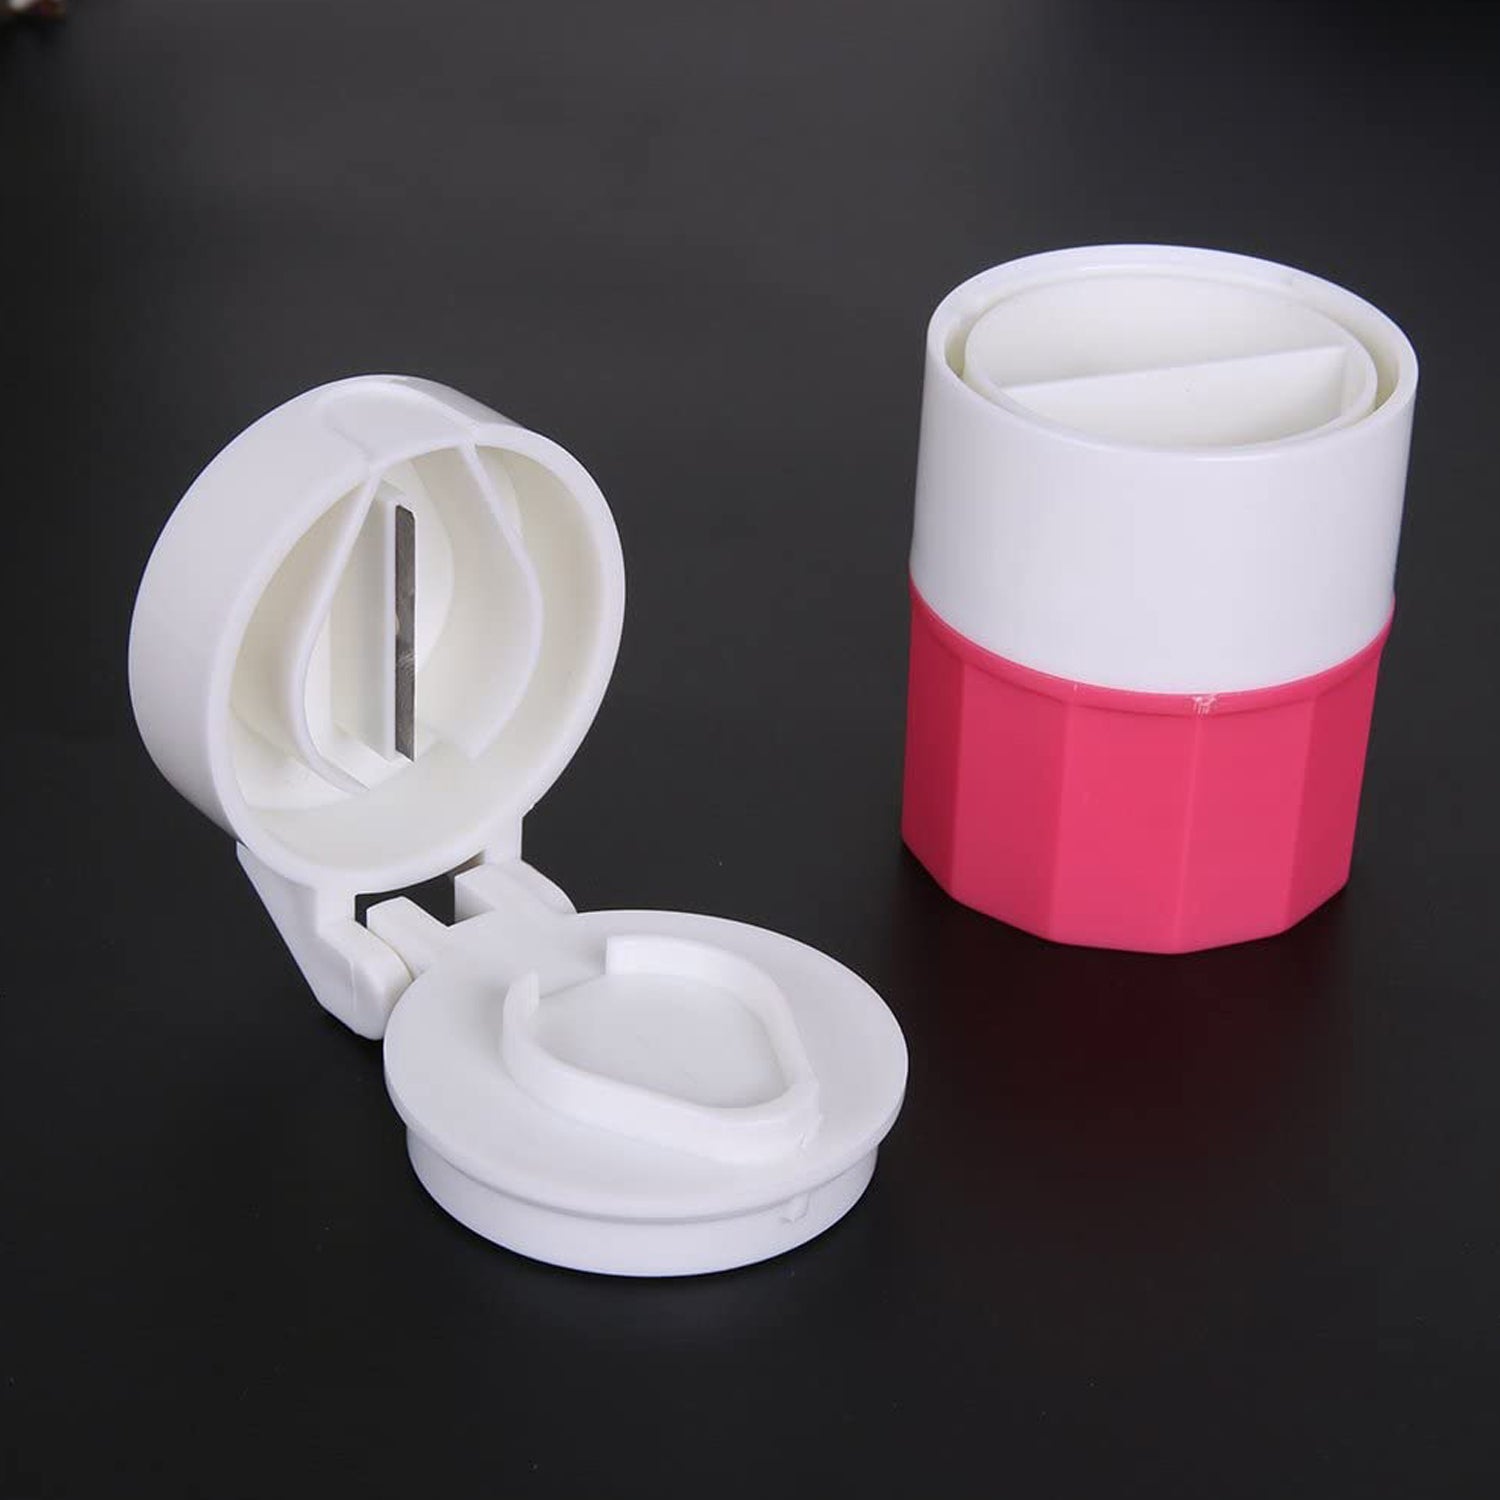 6076  4-in-1 Layer Multipurpose Plastic Portable Pocket Size Tablet Medicine Cutter Divider with Partitioned Storage and Crusher Grinder Powder DeoDap